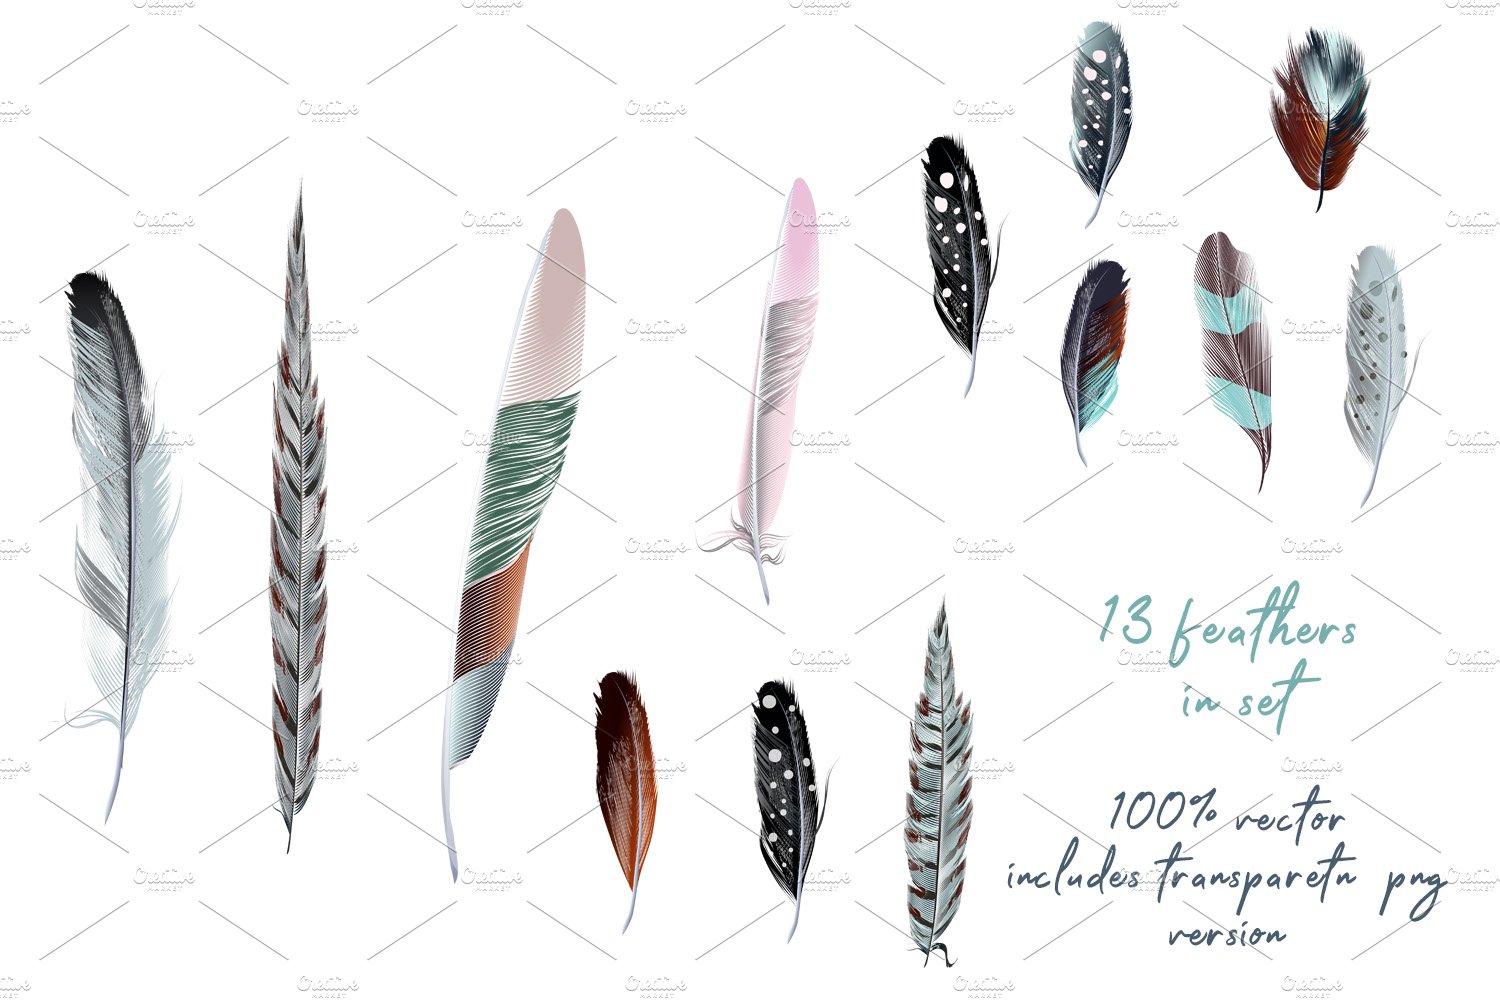 Cool diverse of feathers.